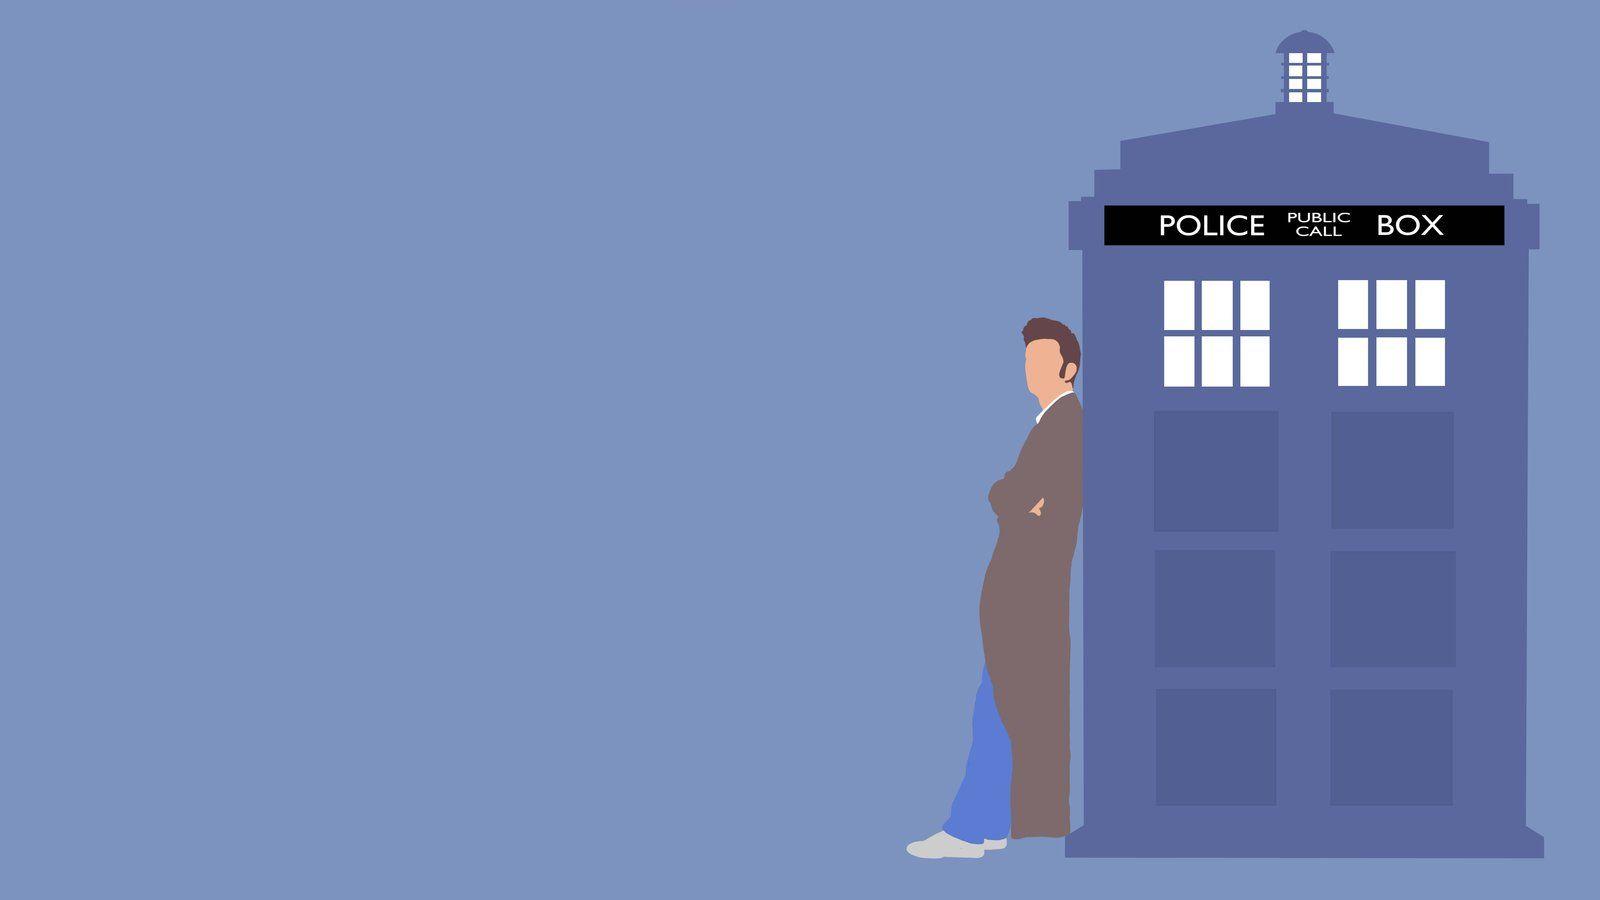 More Like The 10th Doctor and his TARDIS Wallpaper